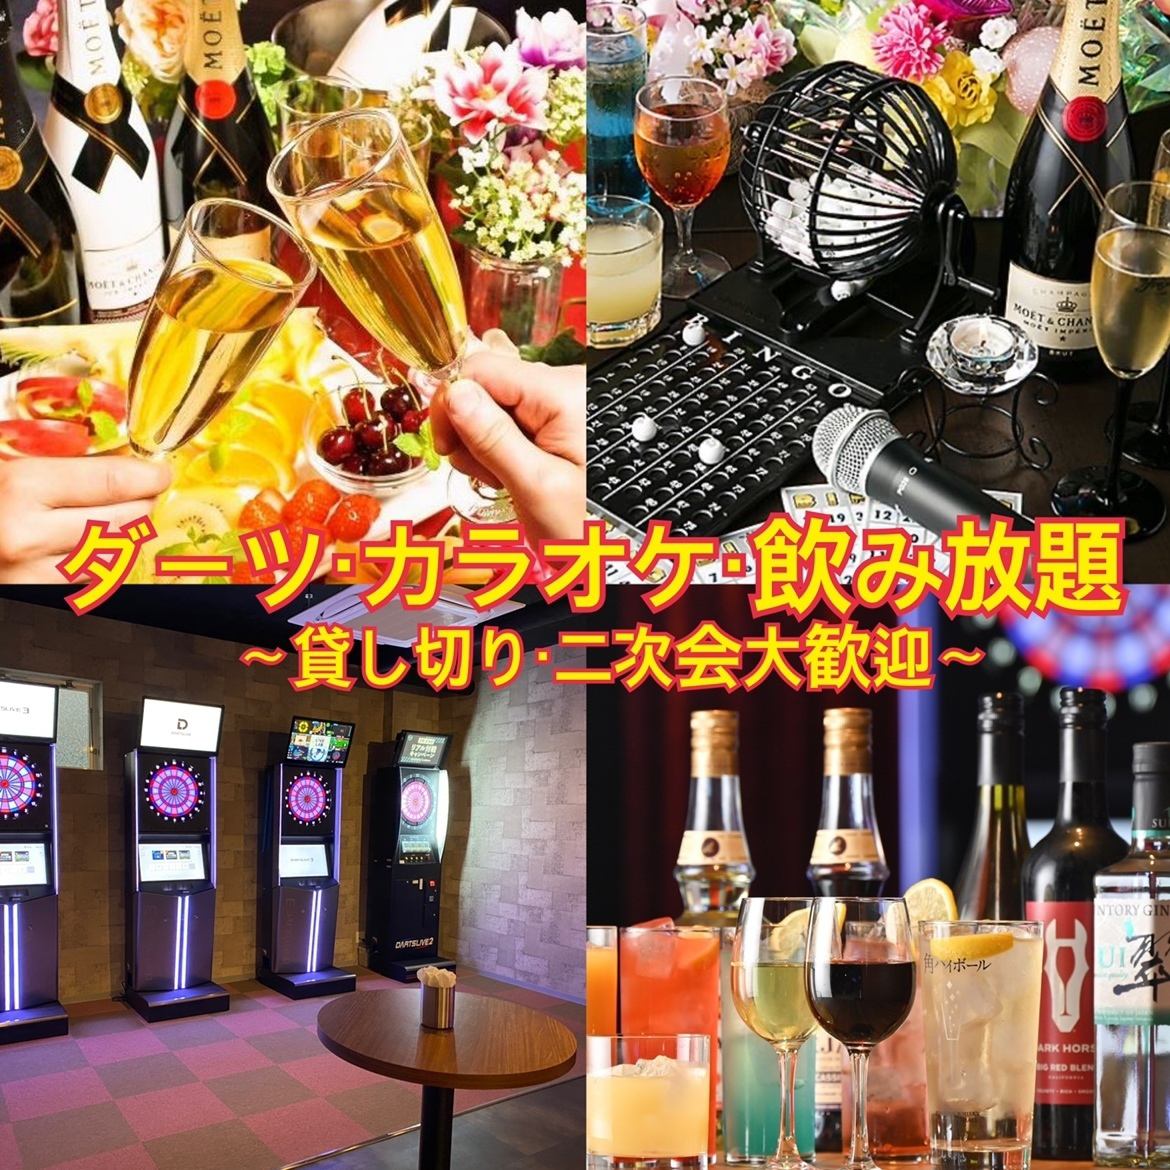 If you want to enjoy darts and karaoke at a good cost performance, go to Delta ♪